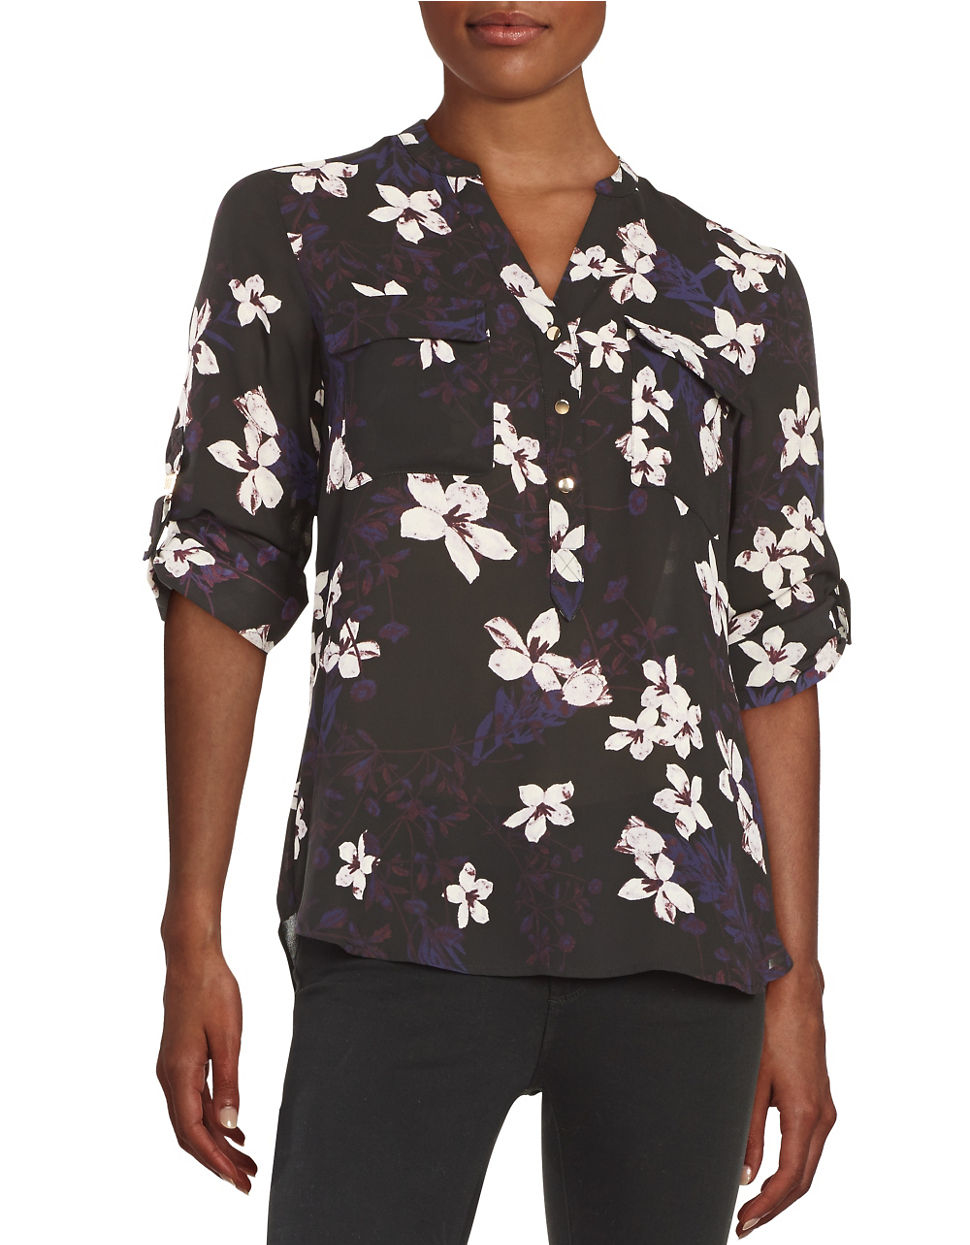 Lyst - Ivanka Trump Floral Button-front Blouse in Purple